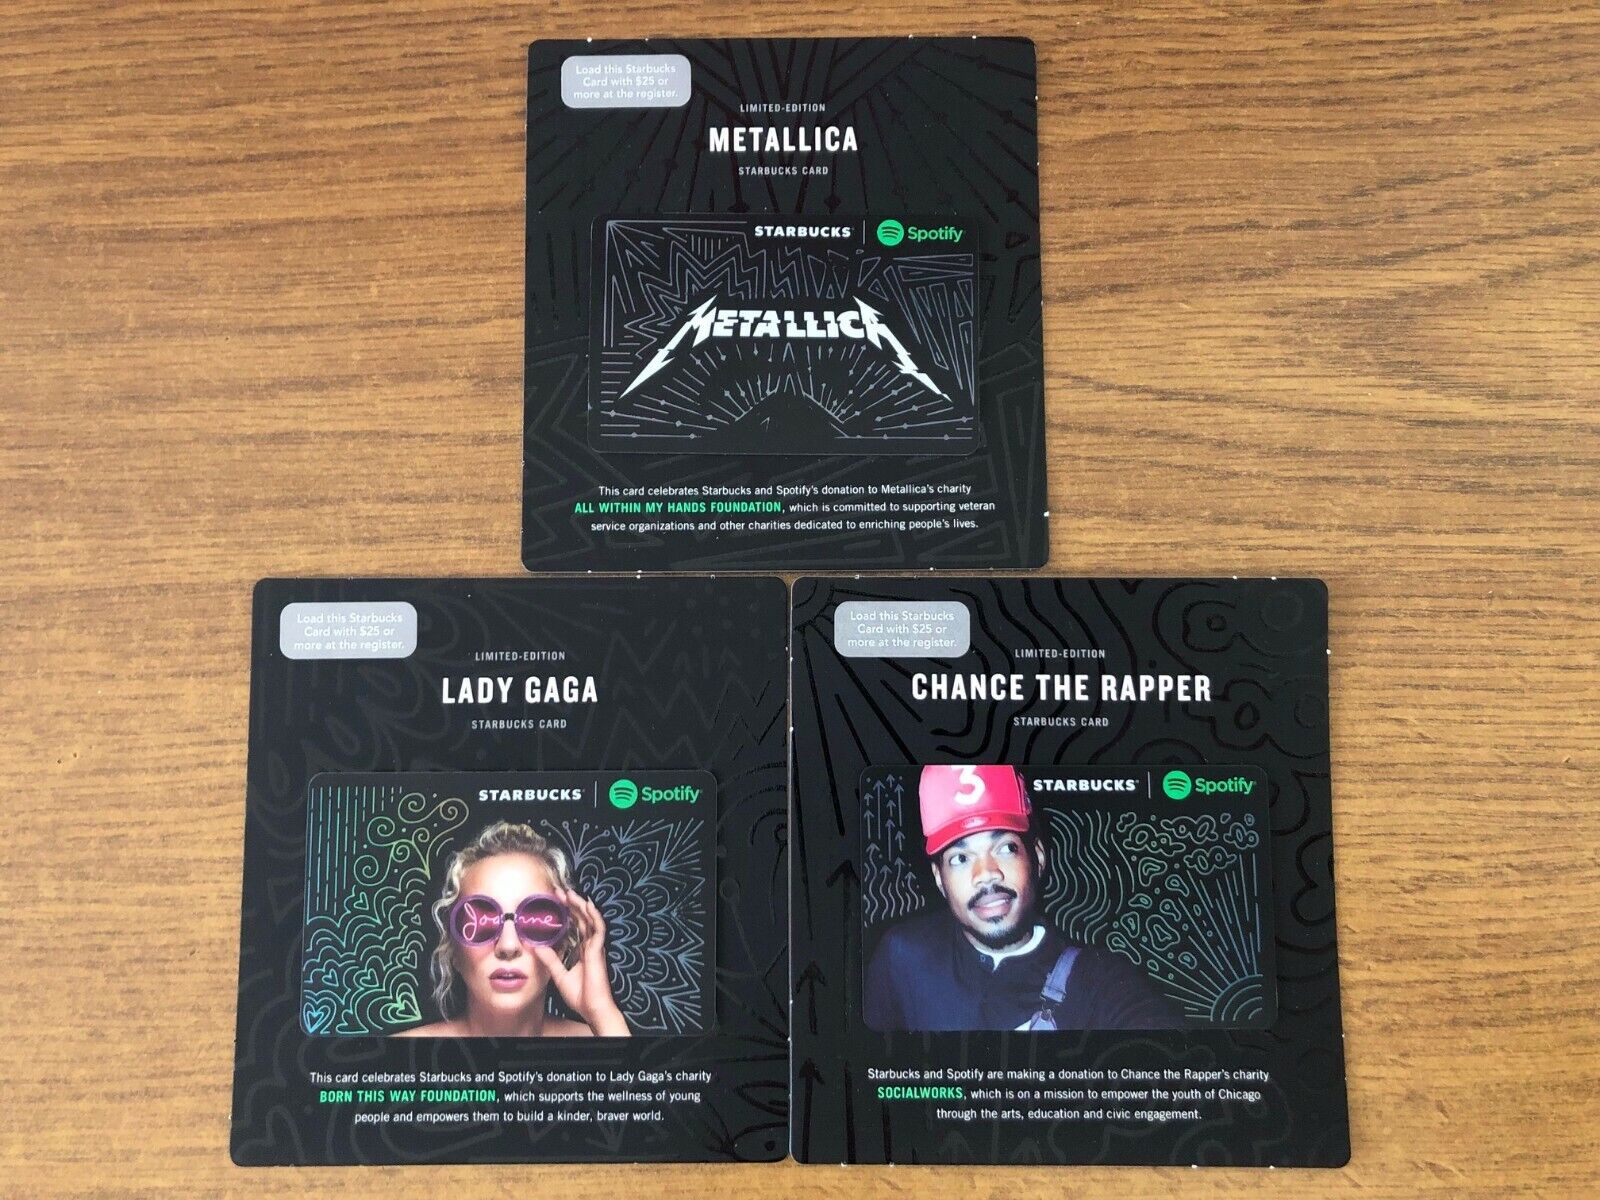 3 NEW STARBUCKS 2017 SPOTIFY GIFT CARDS LADY GAGA METALLICA CHANCE THE RAPPER